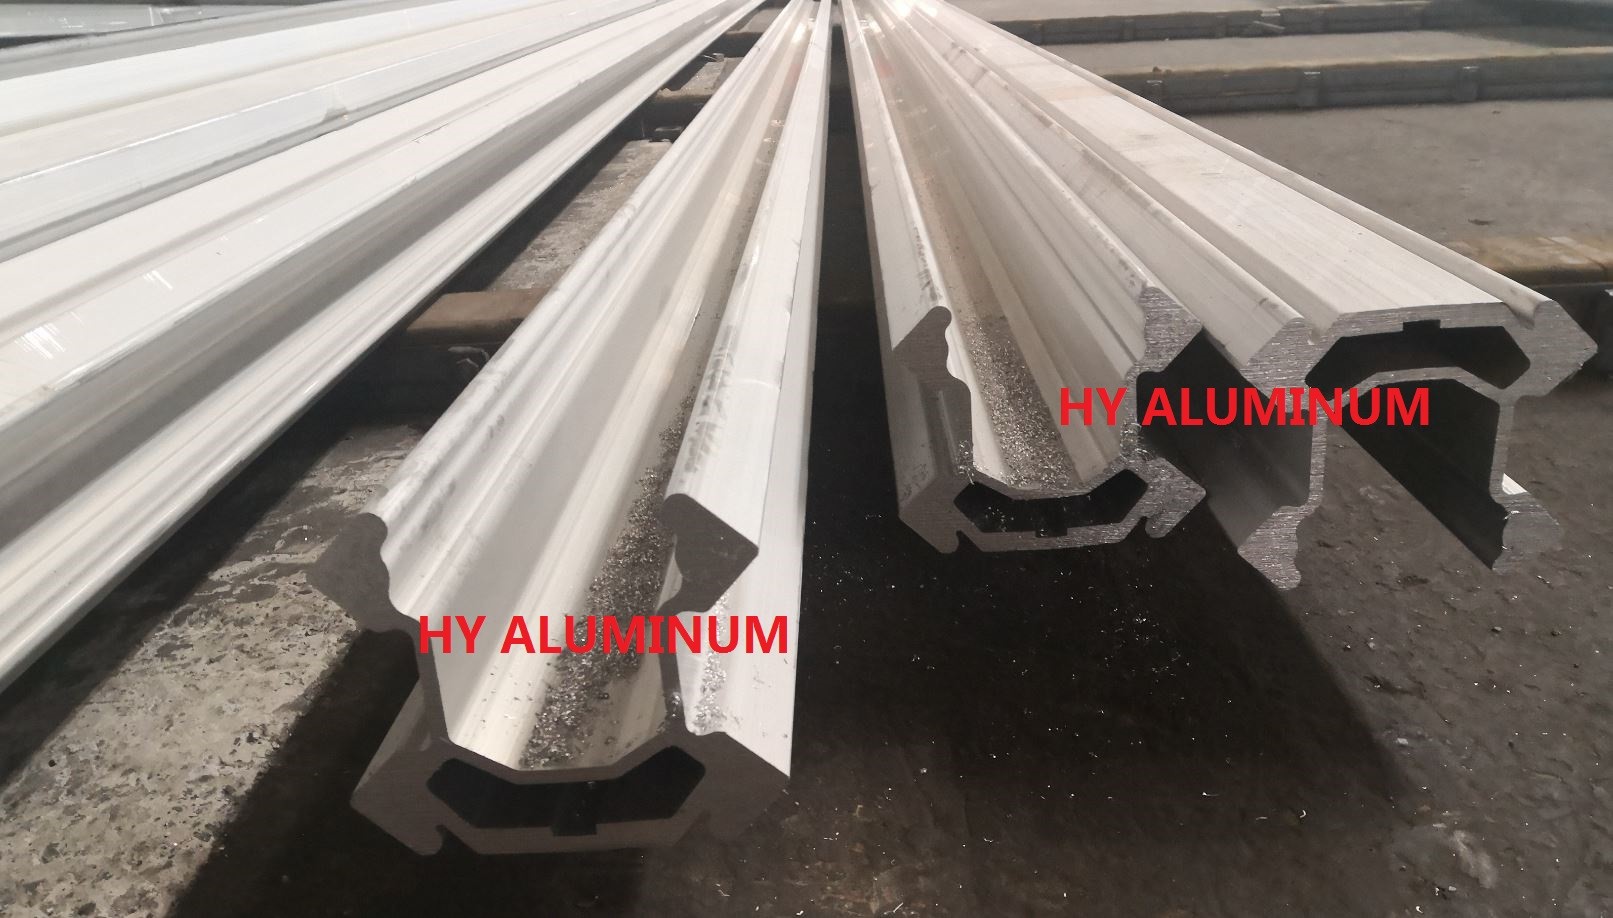 Quarrying Mining Industry Usage BMH2000 Feed Beam Profiles BMH 2000 Aluminium Extruded Profiles